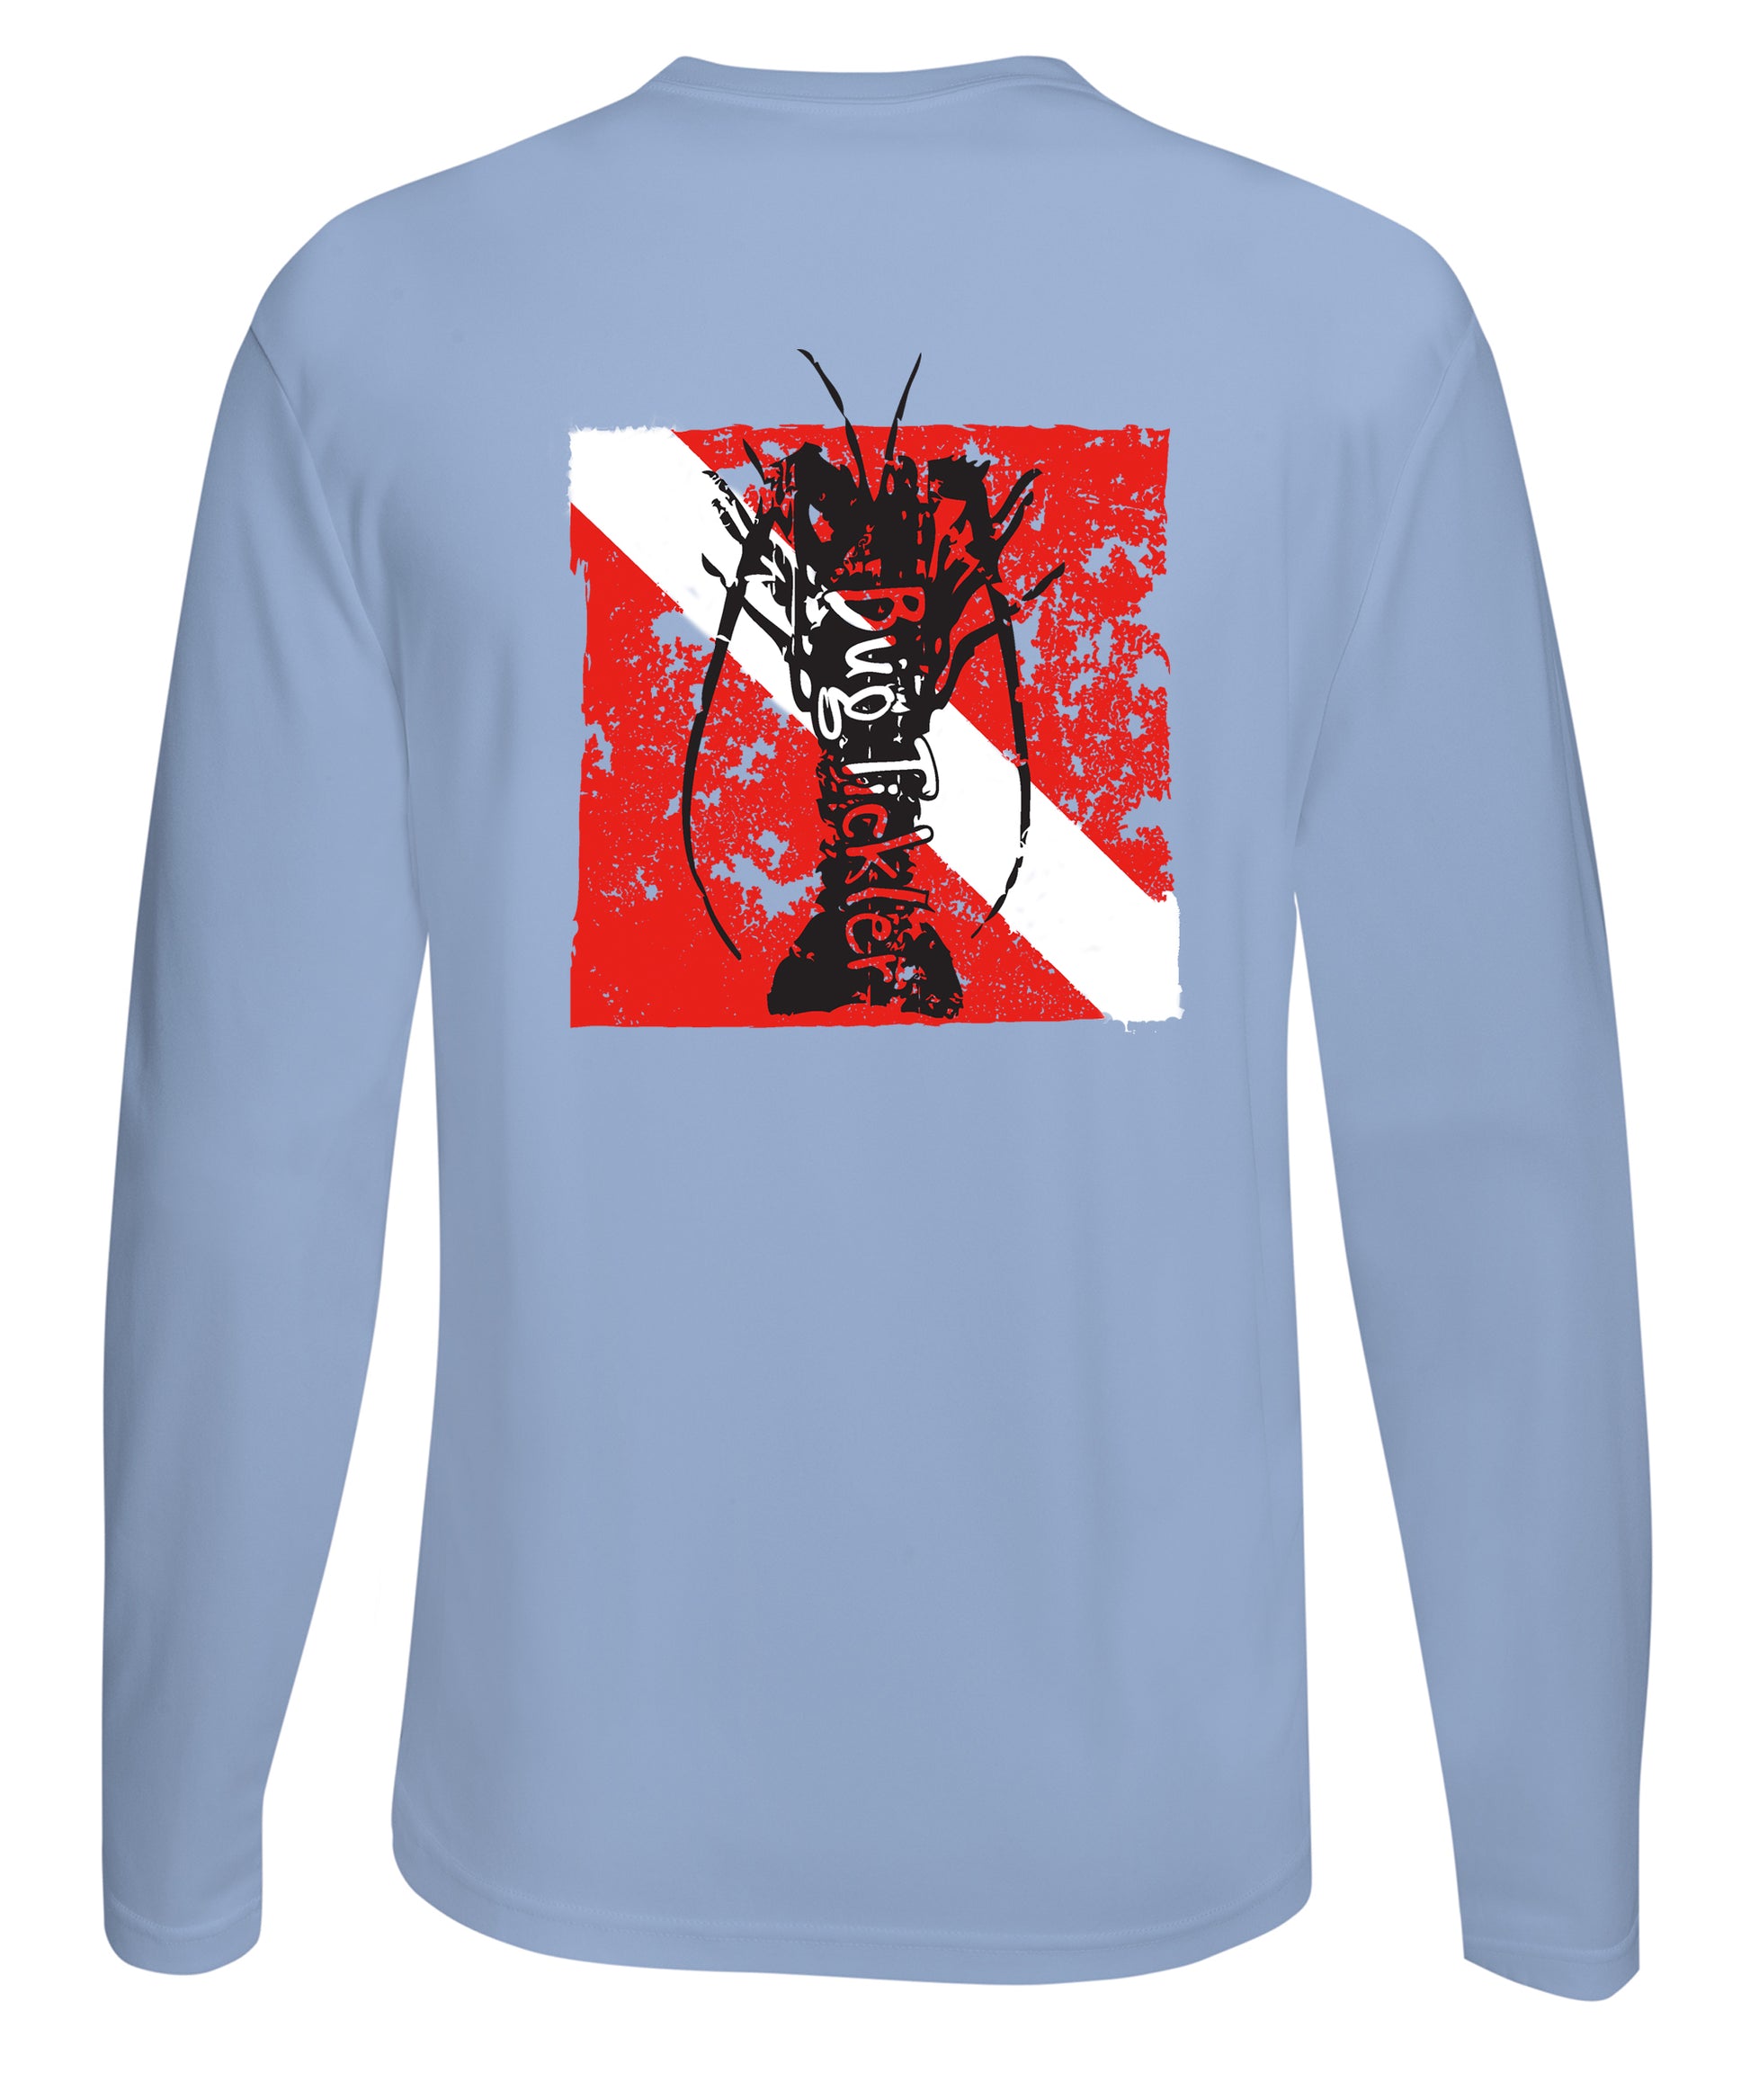 Lobster Performance Dry-Fit Fishing shirts with Sun Protection - "Bug Tickler" Dive Logo - Lt. Blue Long Sleeve